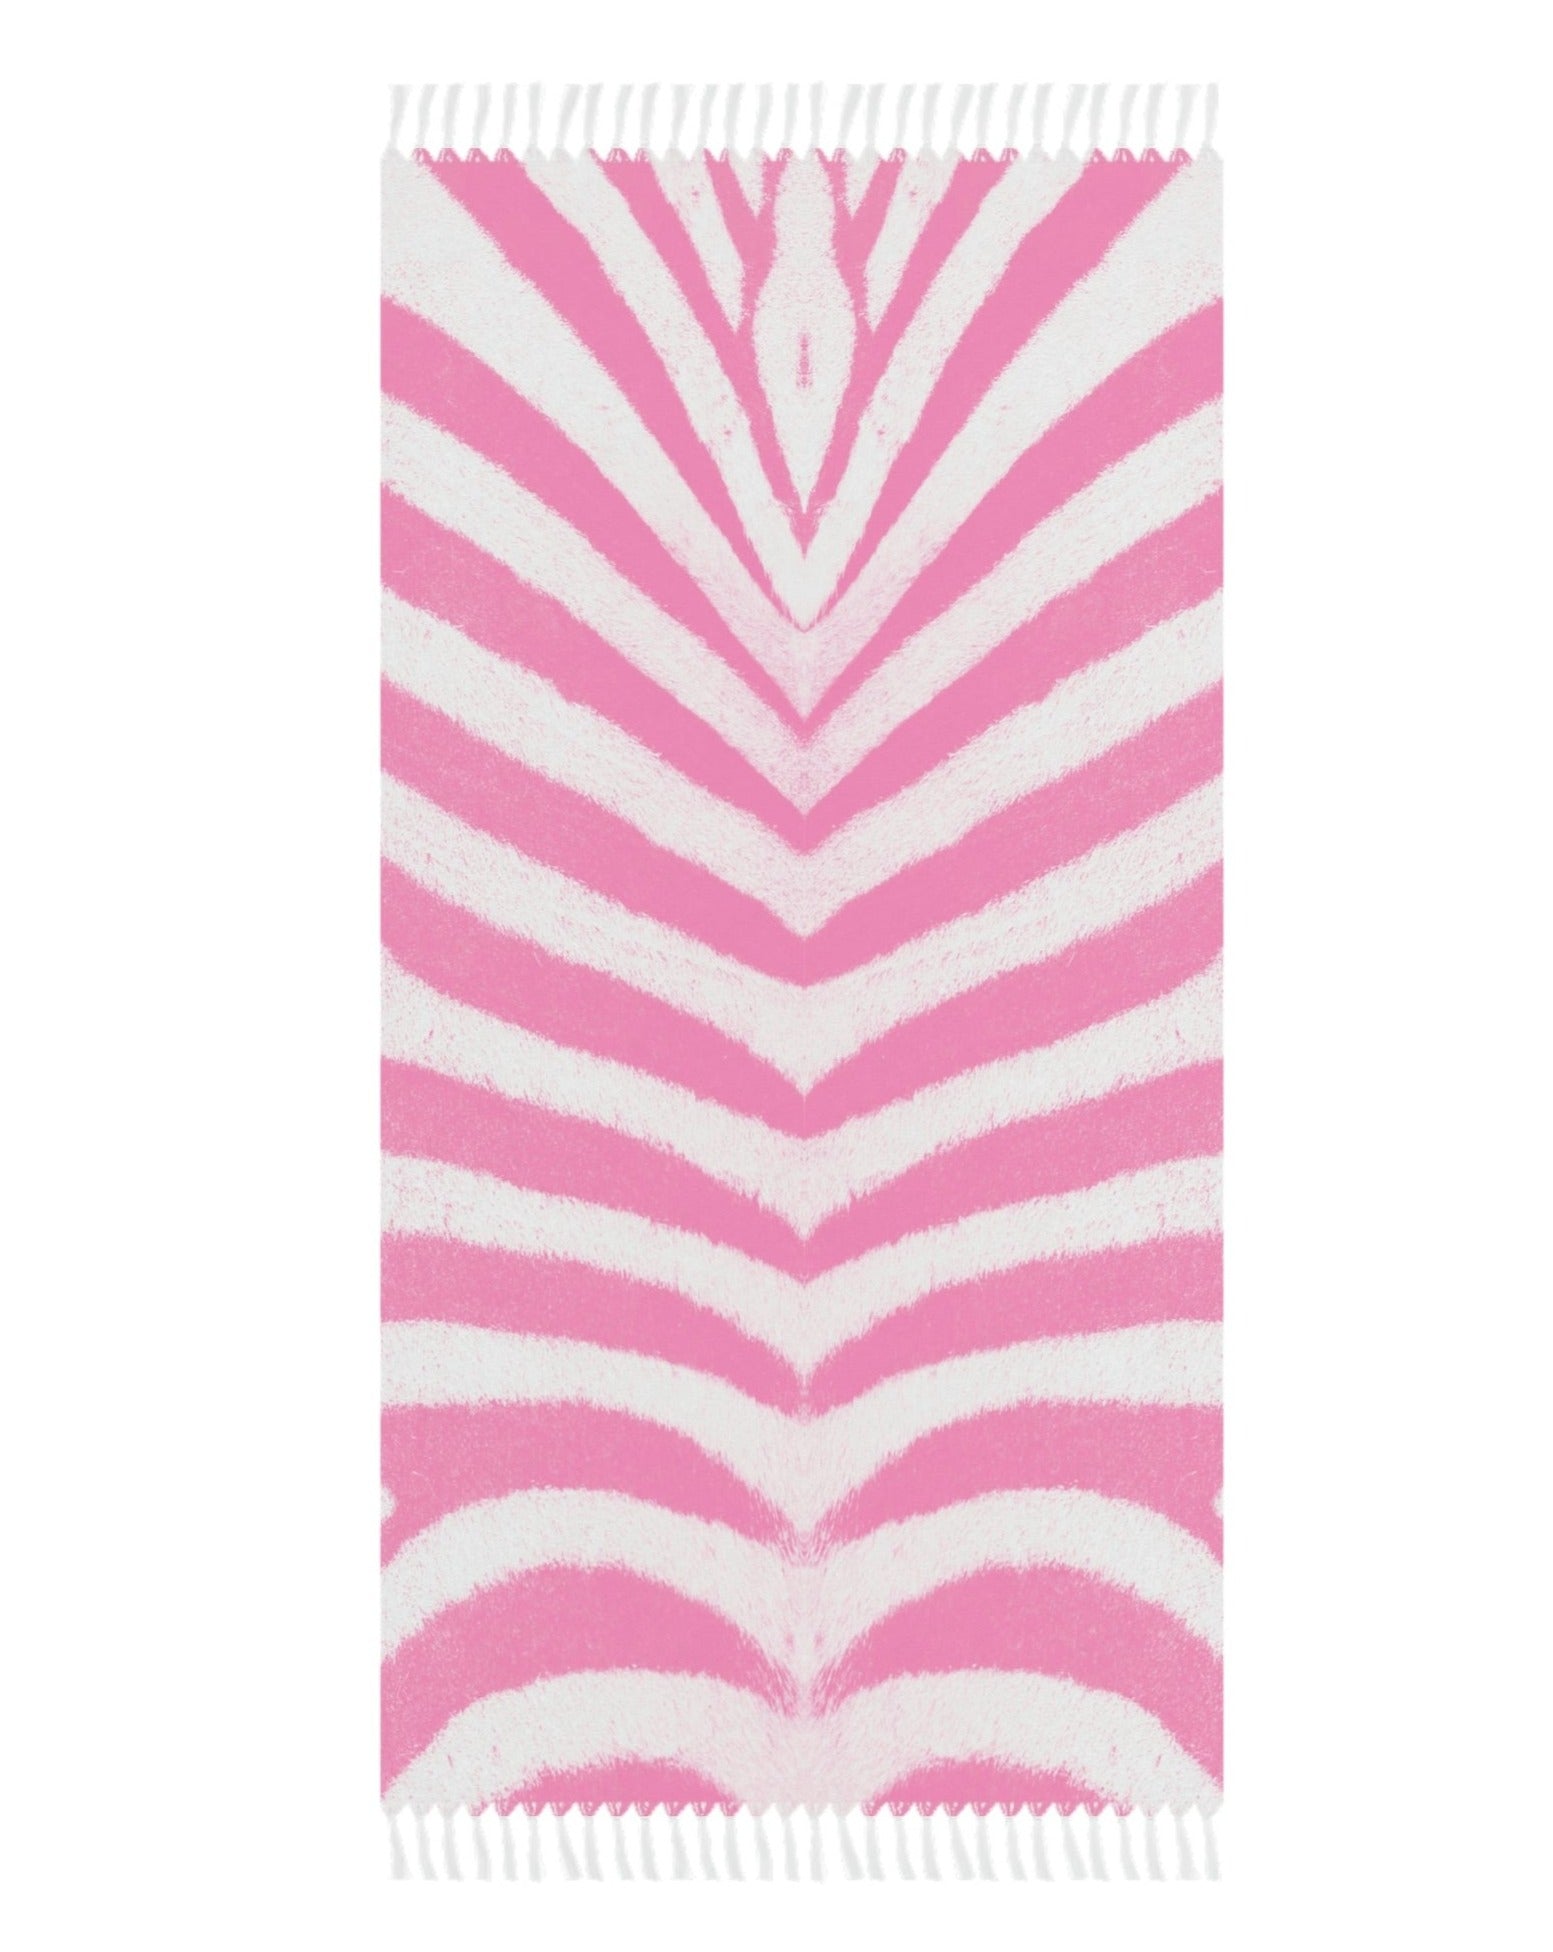 Boho Beach Blanket - Pink And White Striped - BRYKNOLO LLC Home Decor 38" × 81" / Polyester